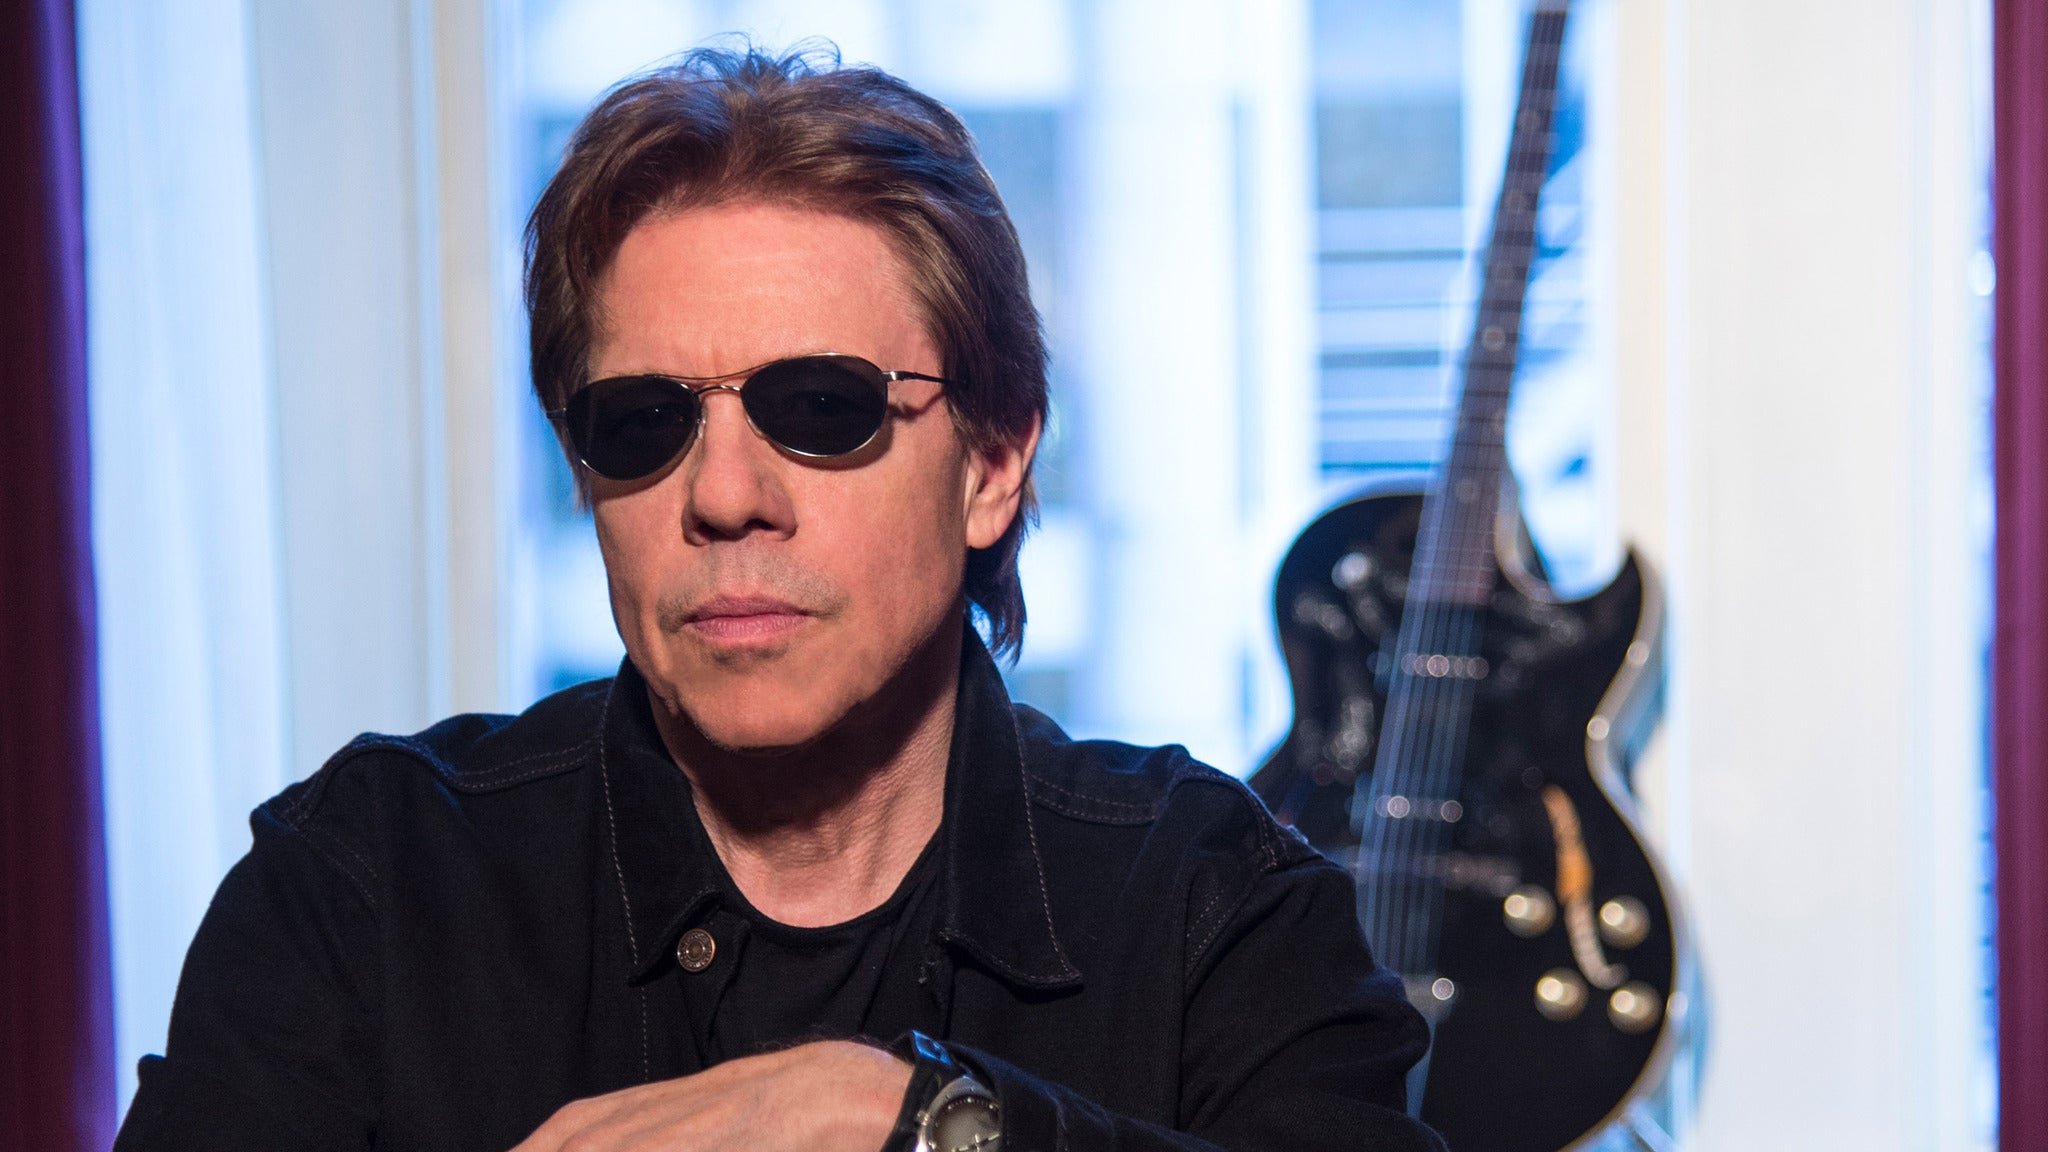 members only presale password for George Thorogood&The Destroyers-